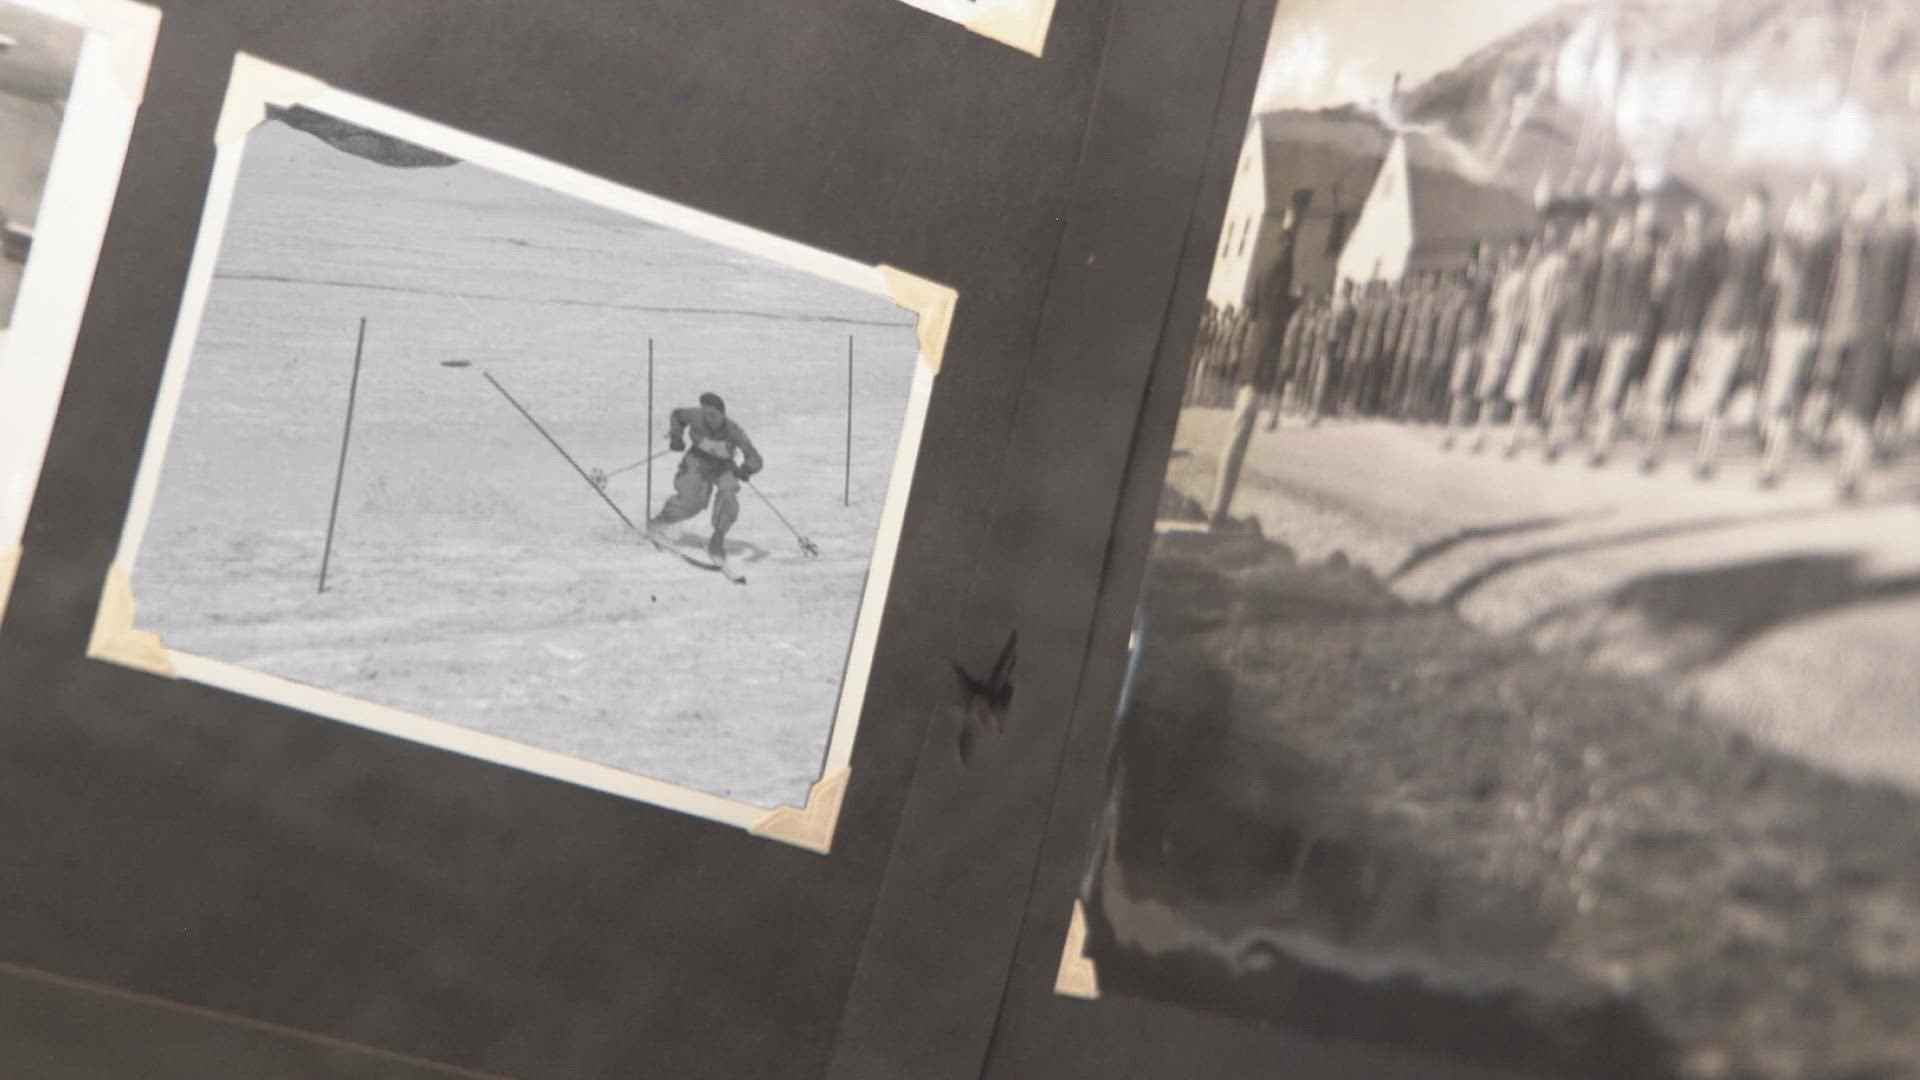 Former ski racer Chris Anthony put together a documentary about the 10th Mountain Division and a ski race they held while fighting in Europe during World War II.